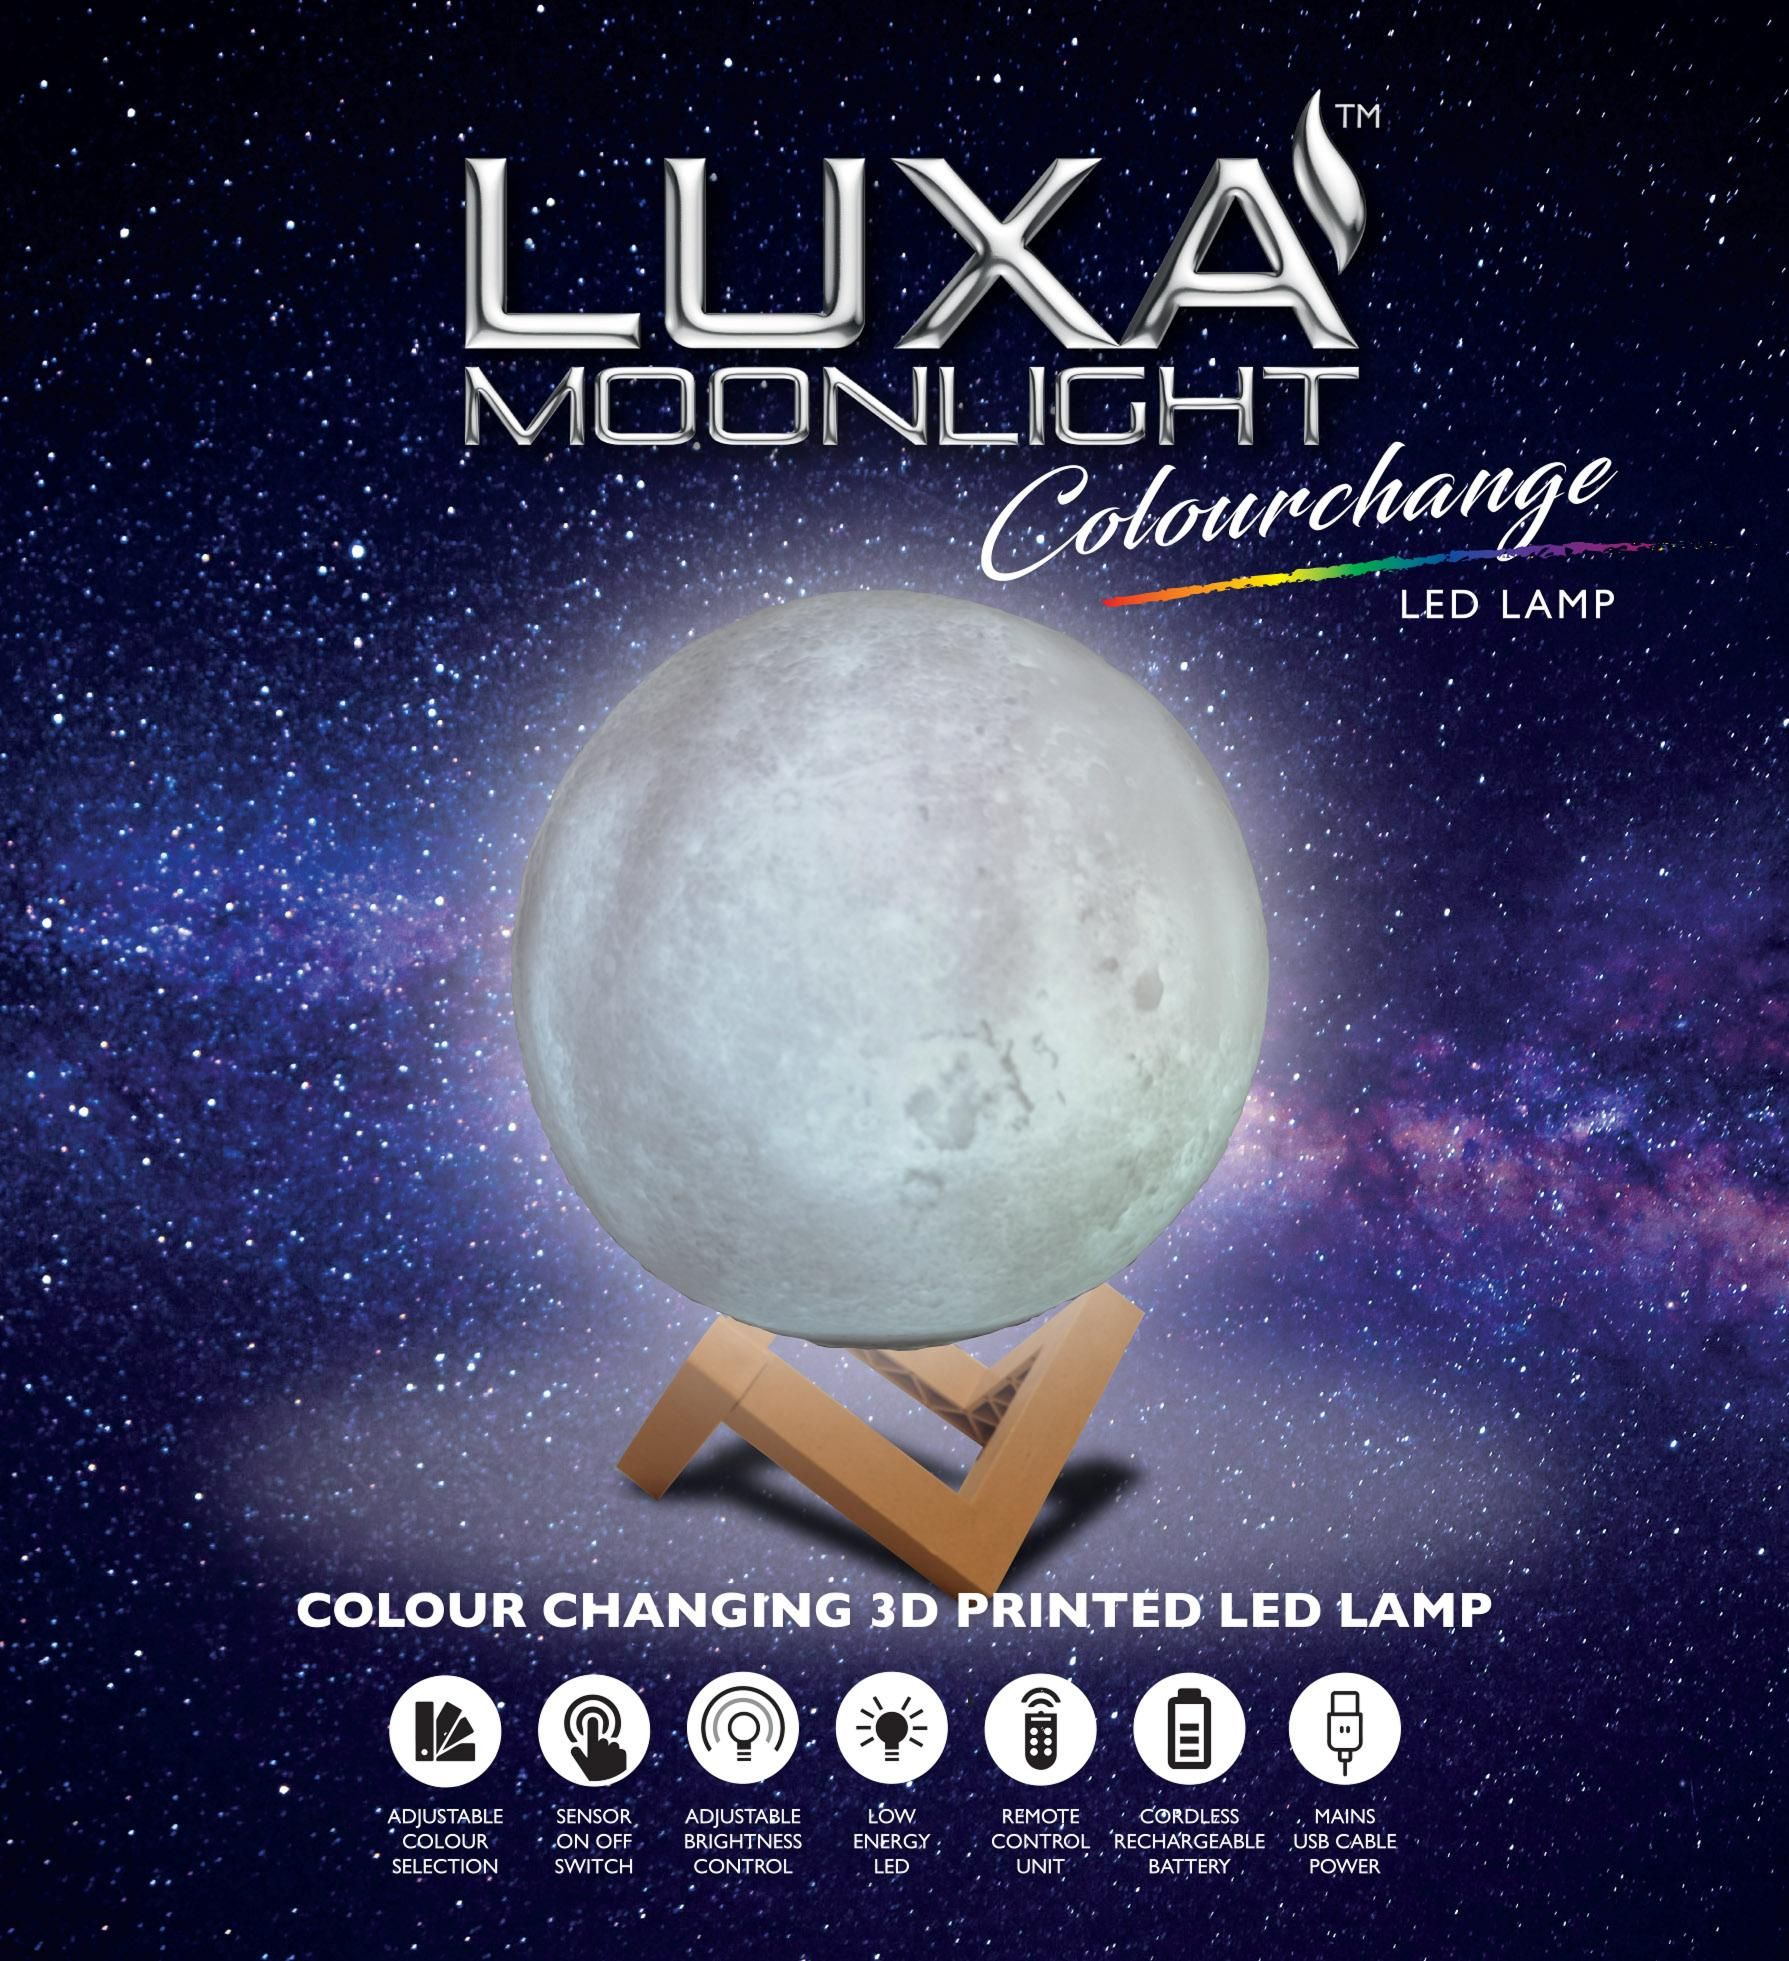 'Moonlight' by Luxa